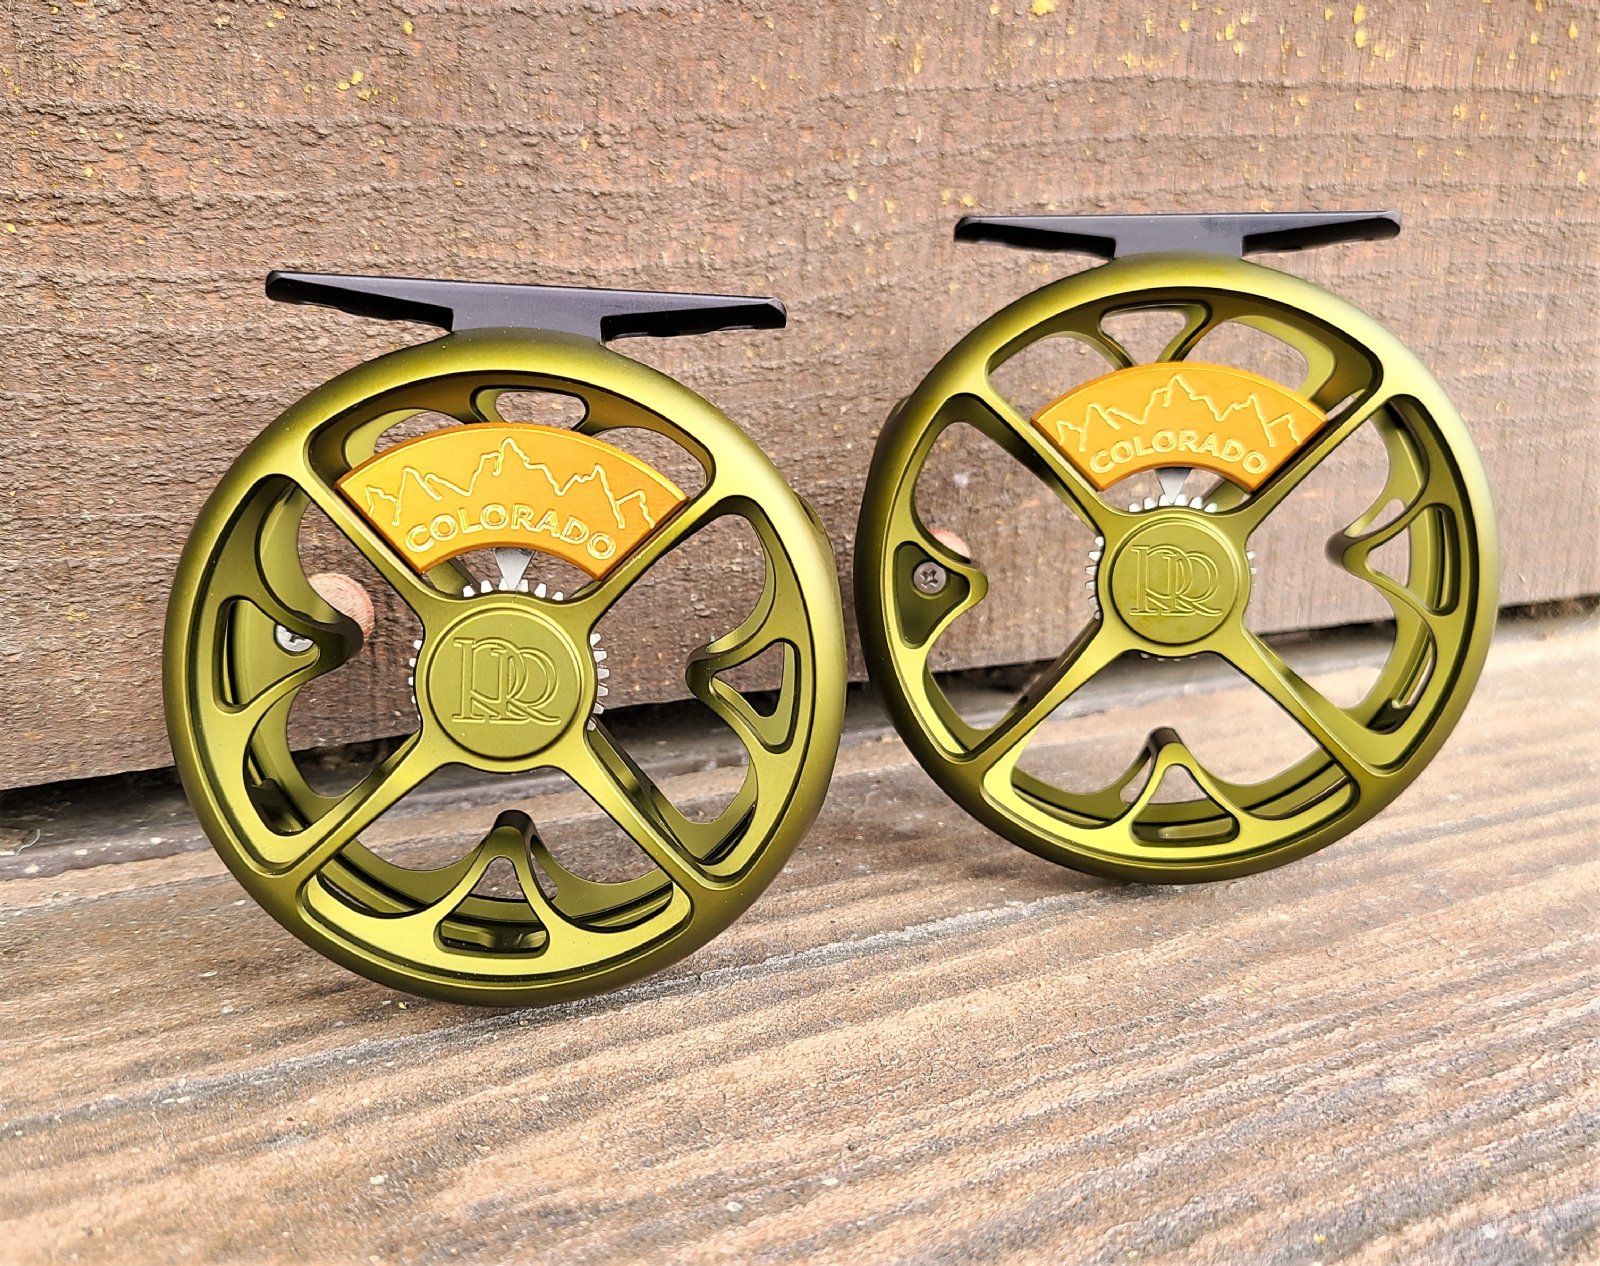 Ross Colorado Fly Reel - Size 2/3 - Matte Olive - NEW